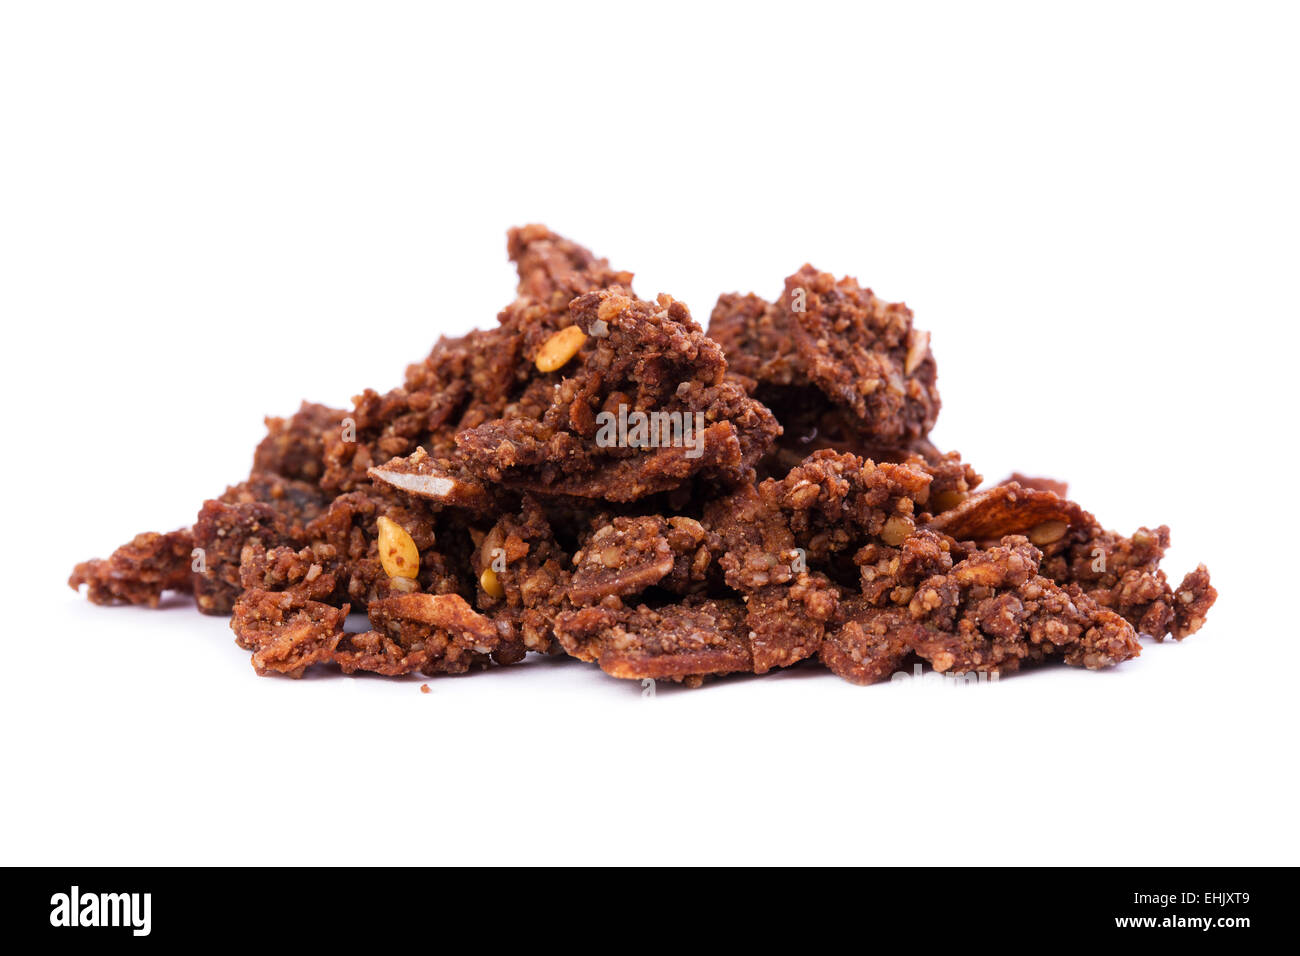 Organic and raw cacao superfood crunchy cereal on white background. High content of nutrients. Stock Photo